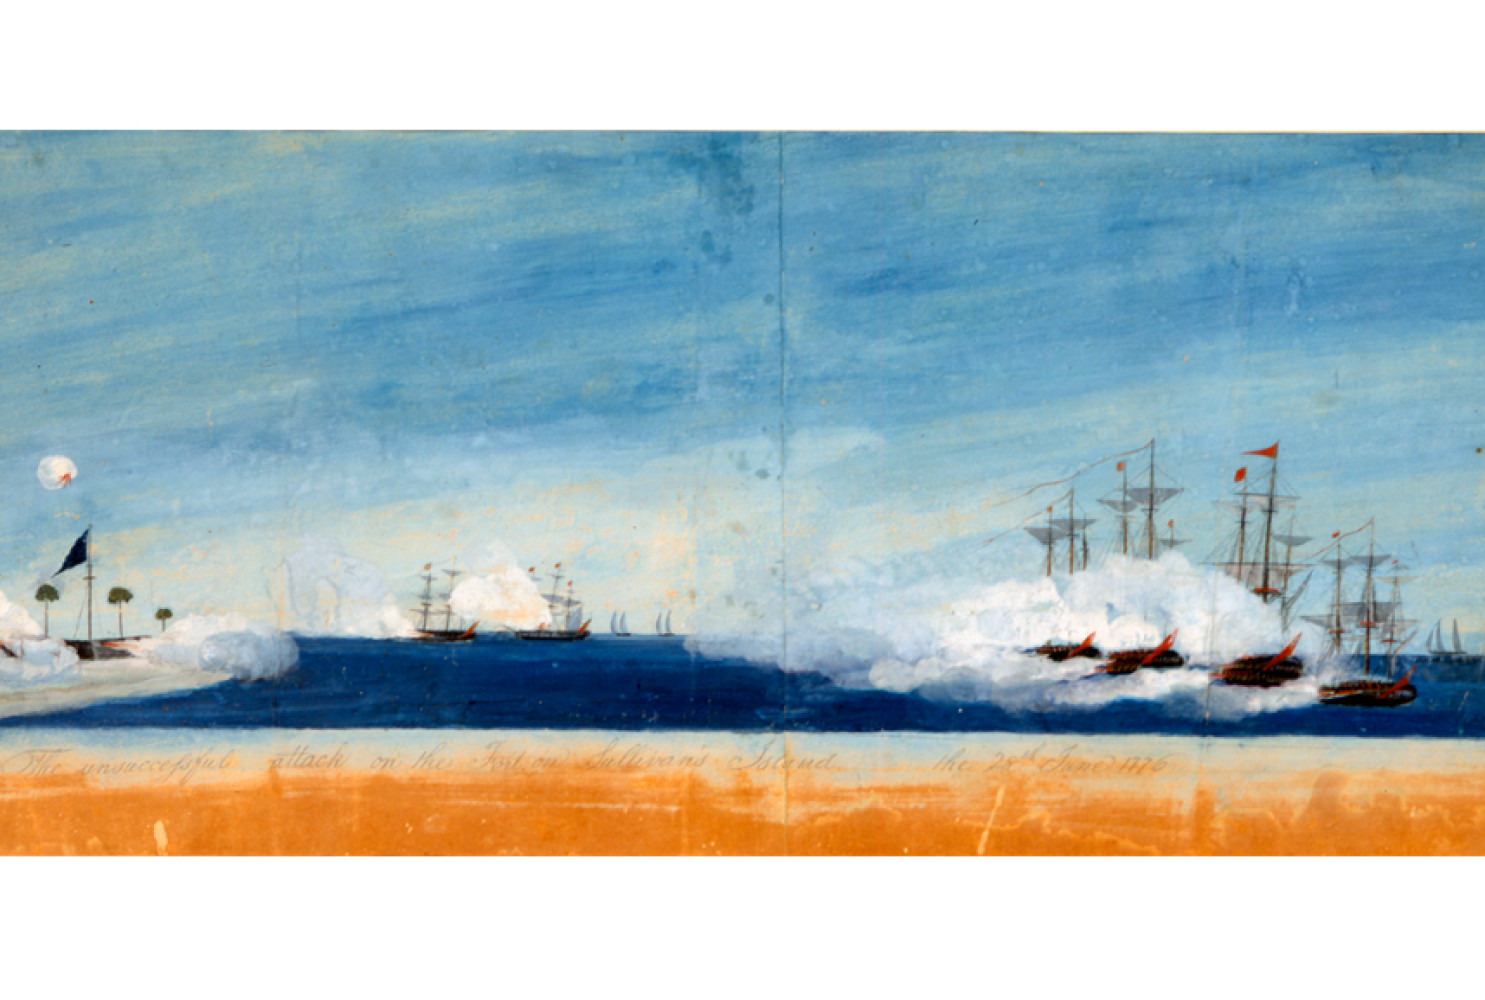 The Unsuccessful Attack on the Fort on Sullivan's Island, 1776, by Henry Gray (American, d. 1821); watercolor on paper; 11 3/4 x 29 1/2 inches; Gift of Mrs. J. Drayton Grimke; 1907.002.0002